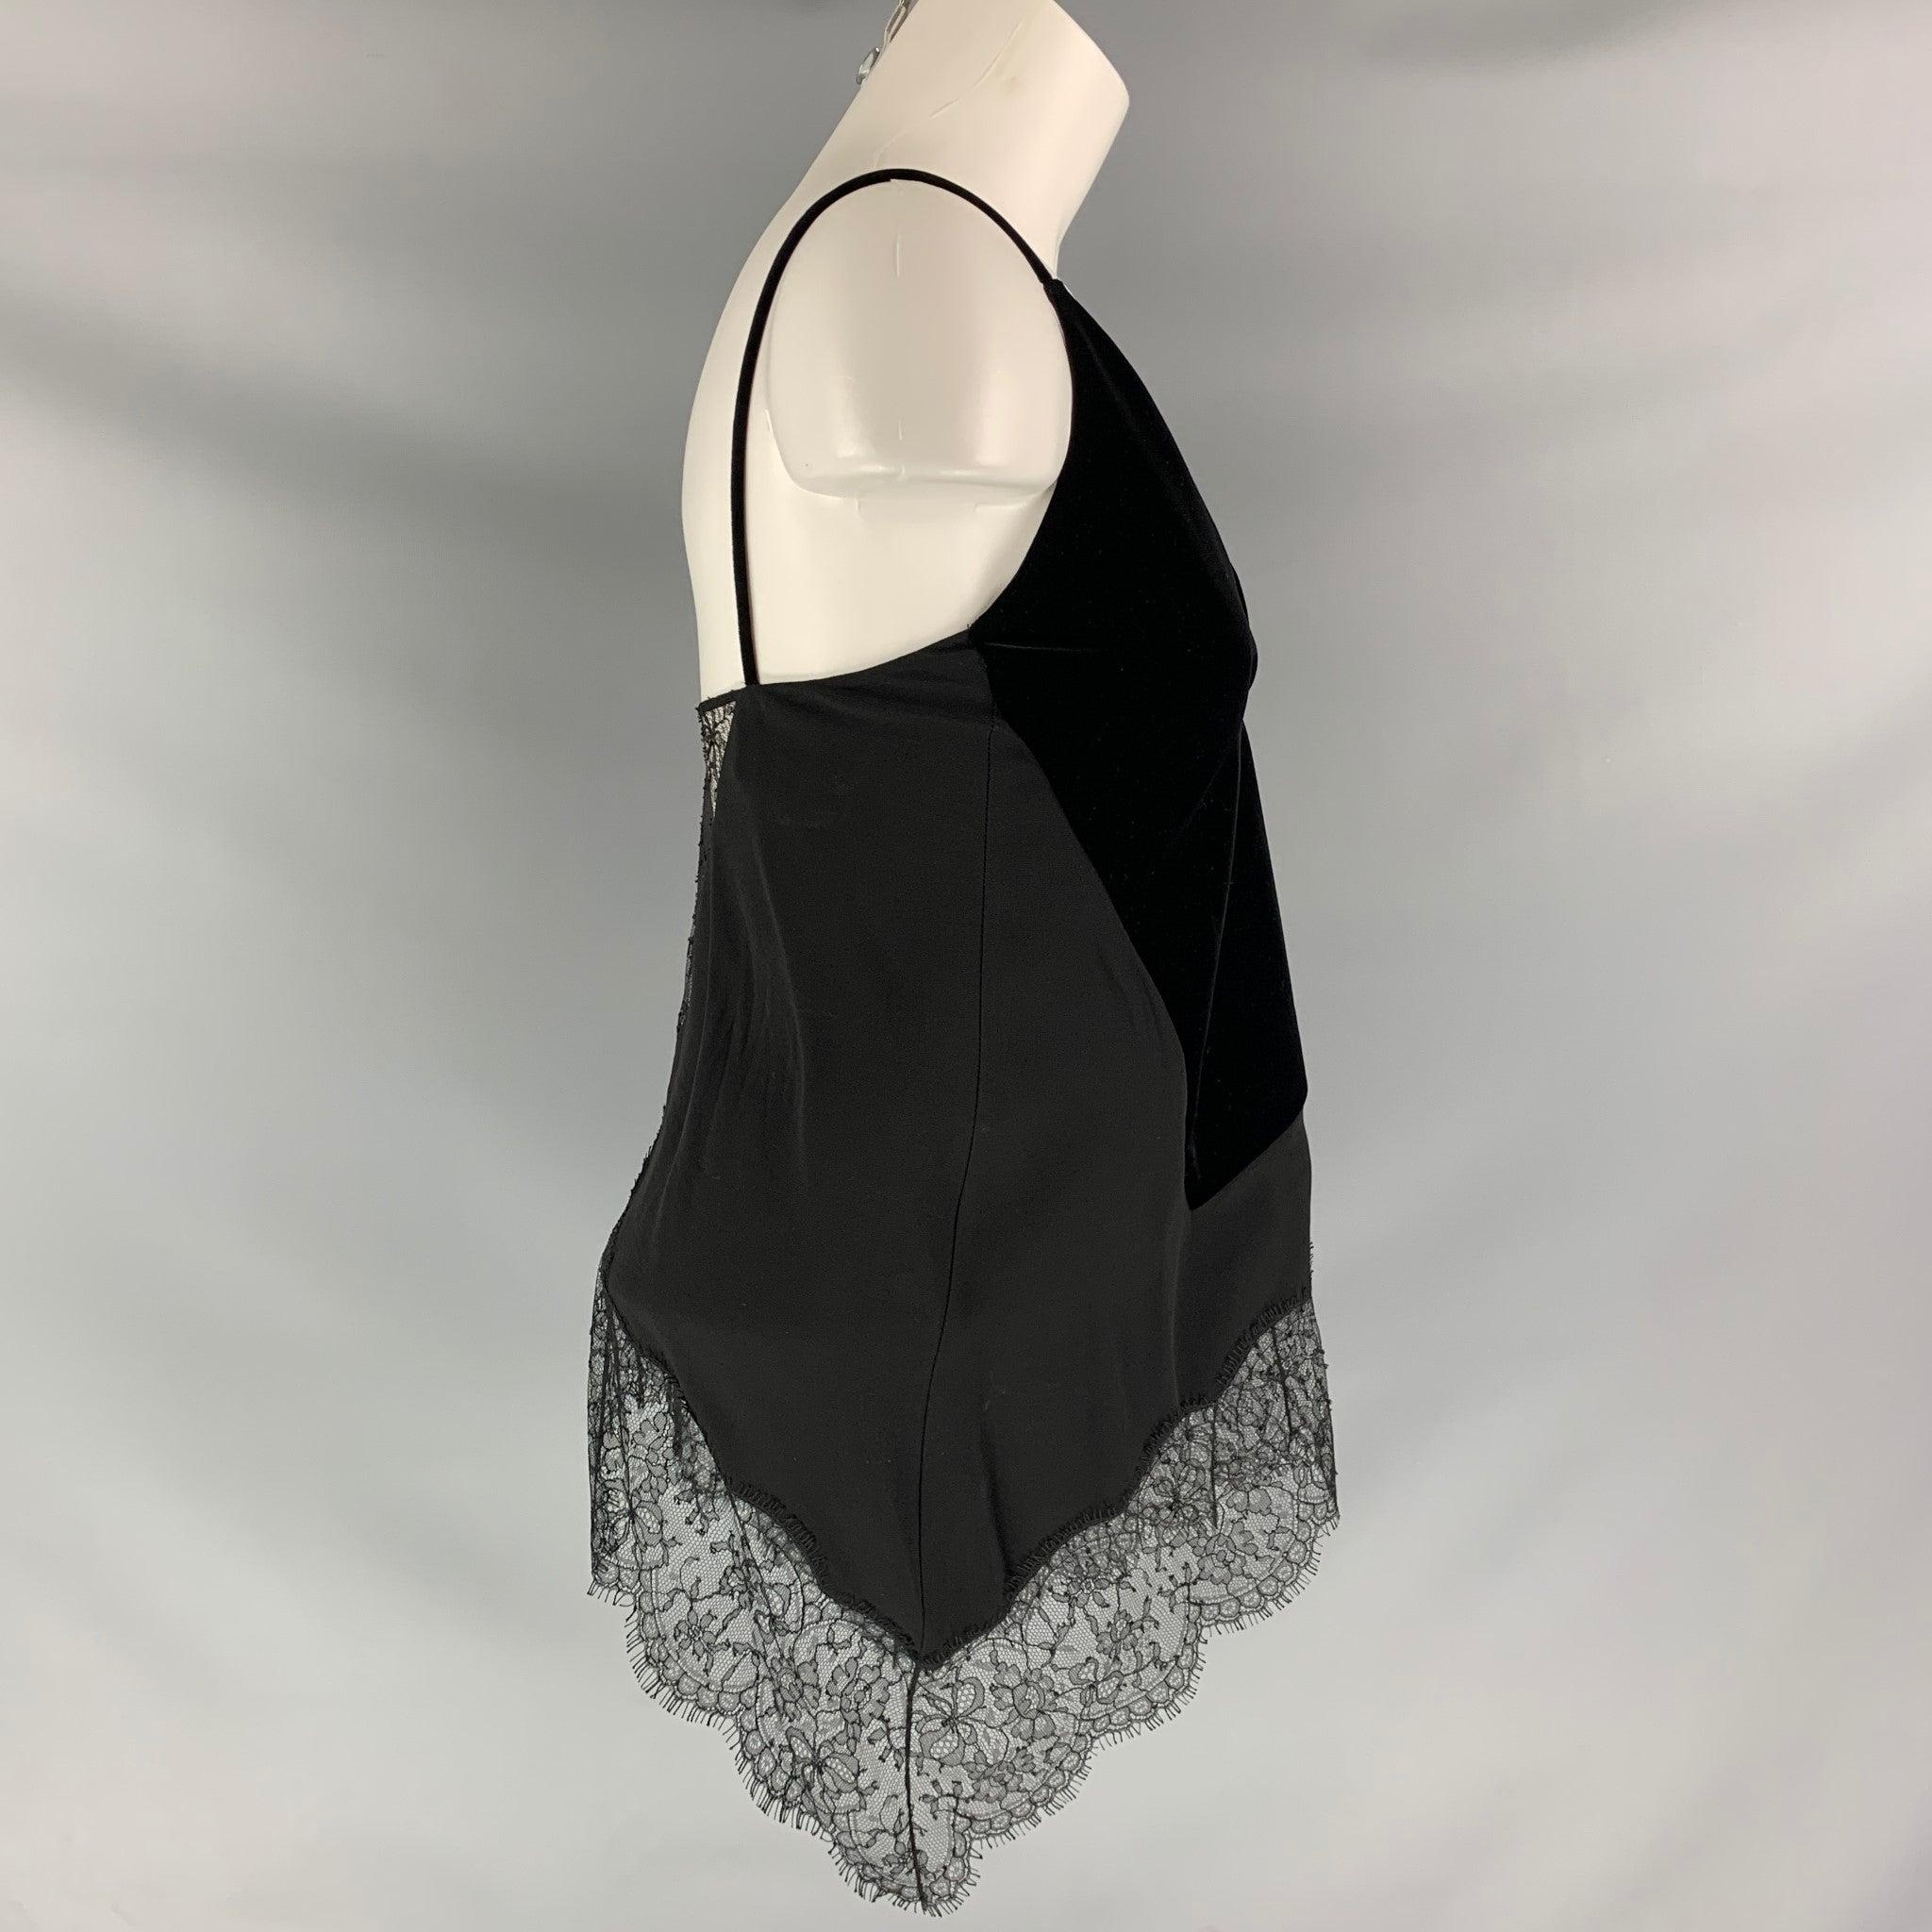 GIVENCHY V- neck dress top comes in black viscose and velvet fabrics, silk lined features lace details.Excellent Pre-Owned Condition. 

Marked:   34 

Measurements: 
  Bust: 32 inFront Length: 14 inBack Length: 13 in
  
  
 
Reference: